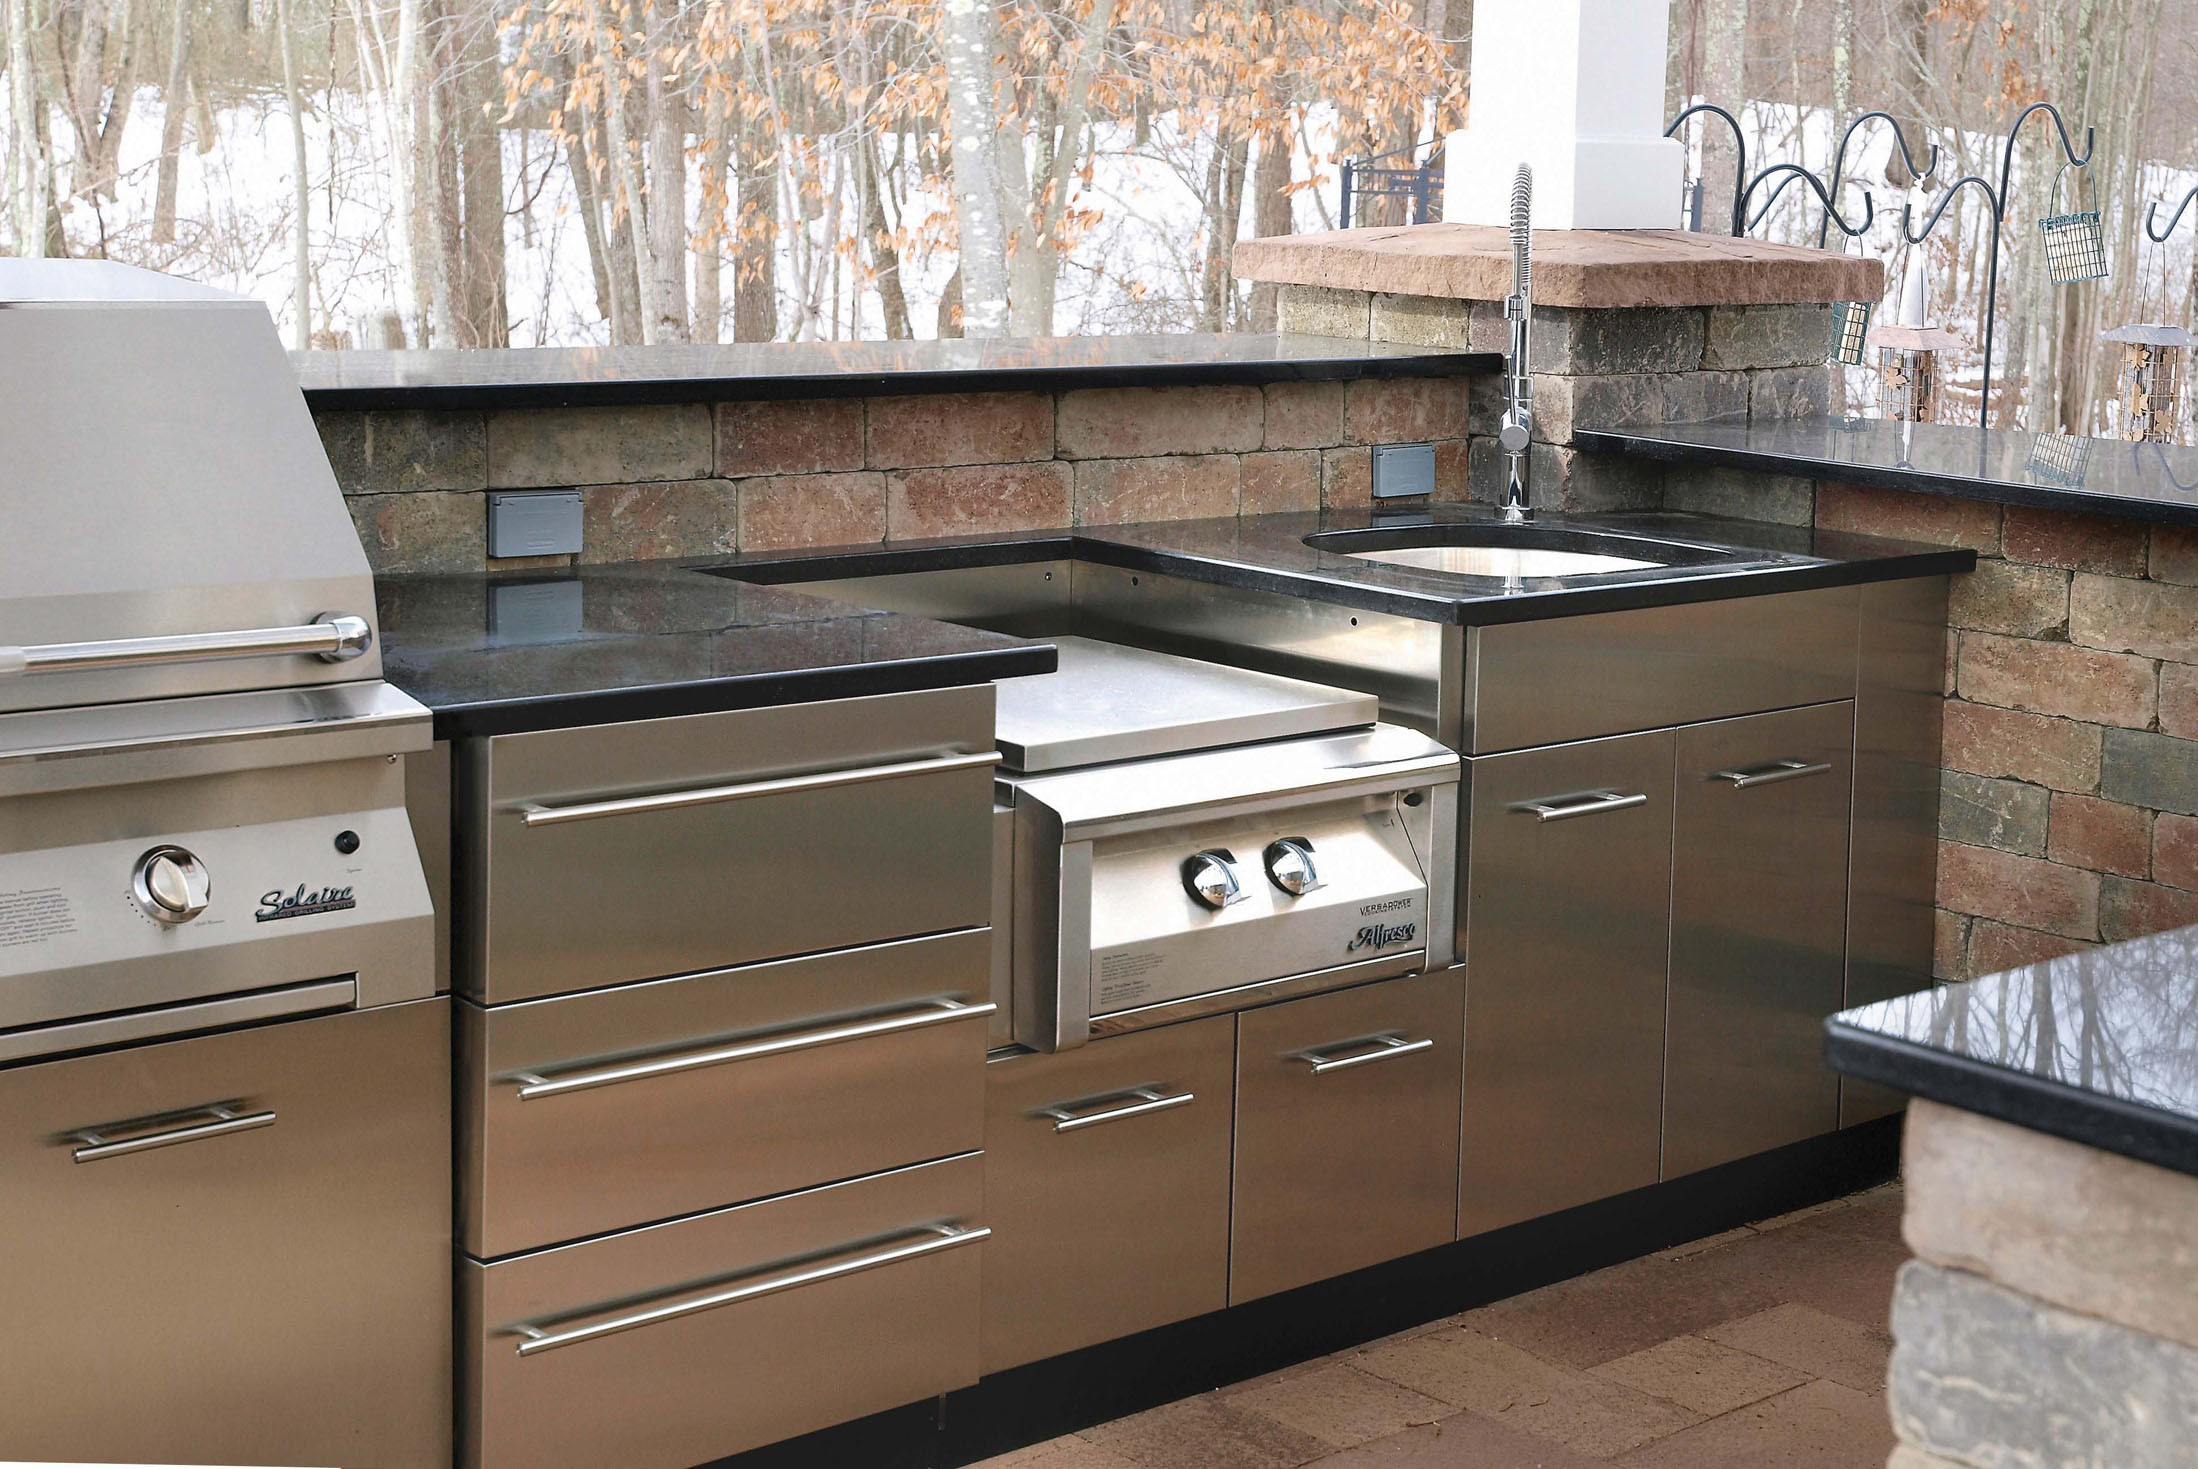 Stainless Steel Outdoor Kitchens
 Outdoor Stainless Kitchen in winter in CT